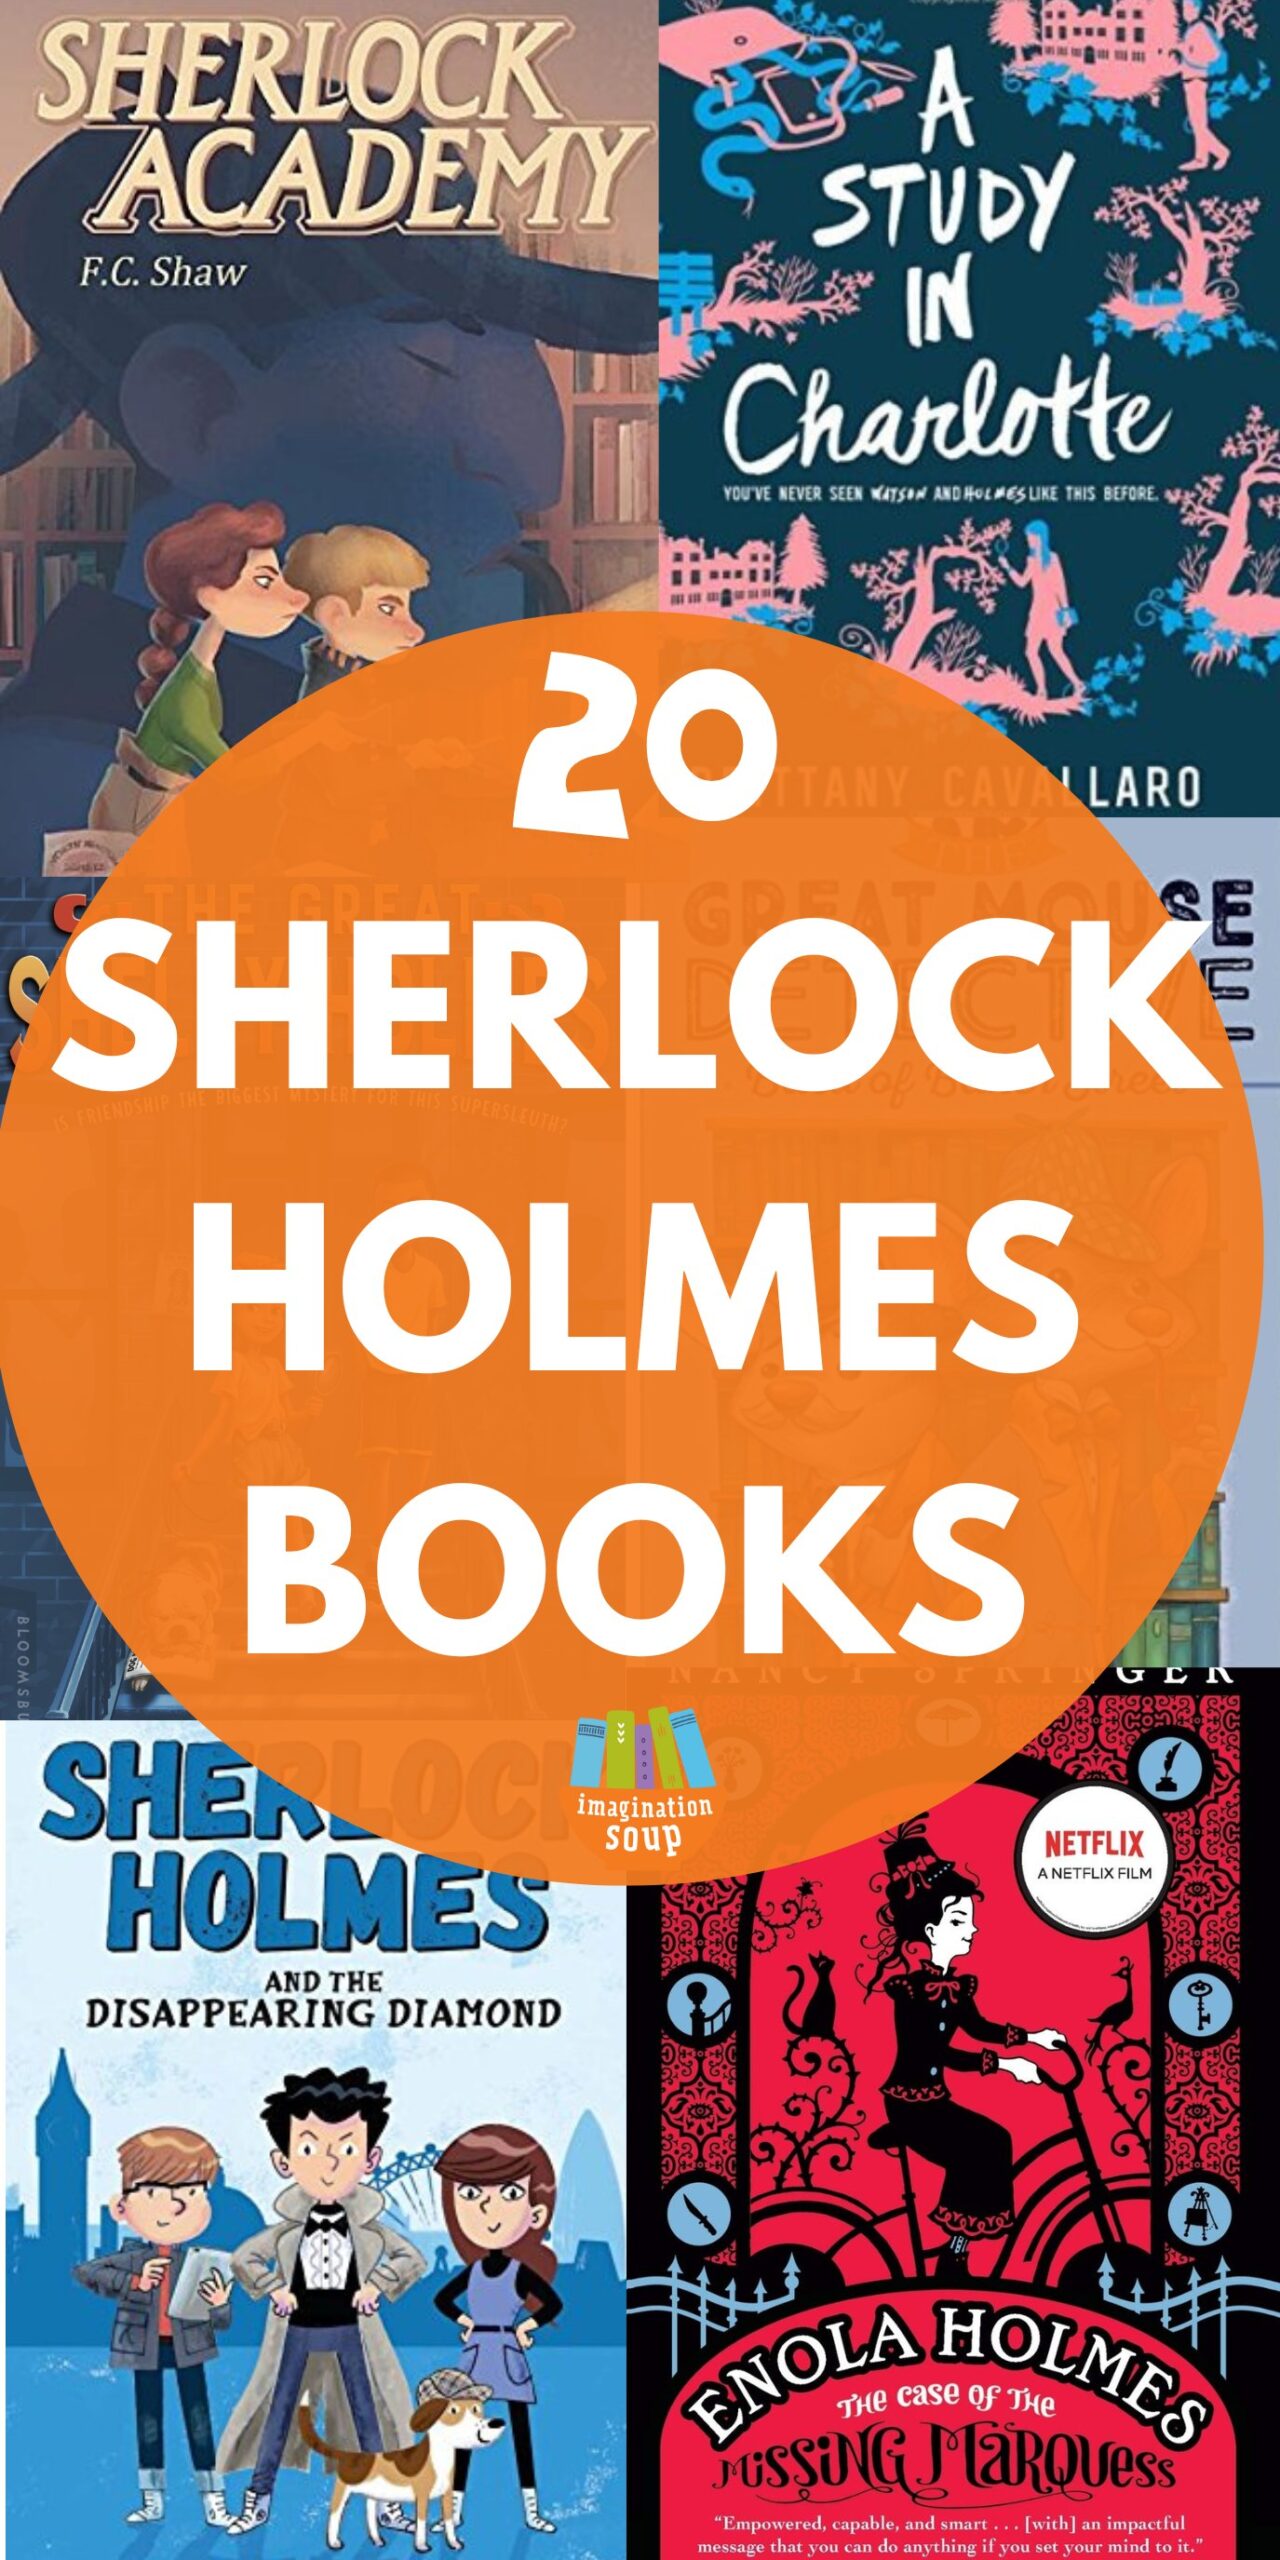 Sir Arthur Conan Doyle invented the world’s greatest detective, Sherlock Holmes, of 221b Baker Street. Since Doyle’s adventure and mystery writing is too difficult for most kids, I’ve good, easier-to-comprehend Sherlock Holmes books and short stories for kids and teens related to Sherlock Holmes plus a few other fun goodies as well…